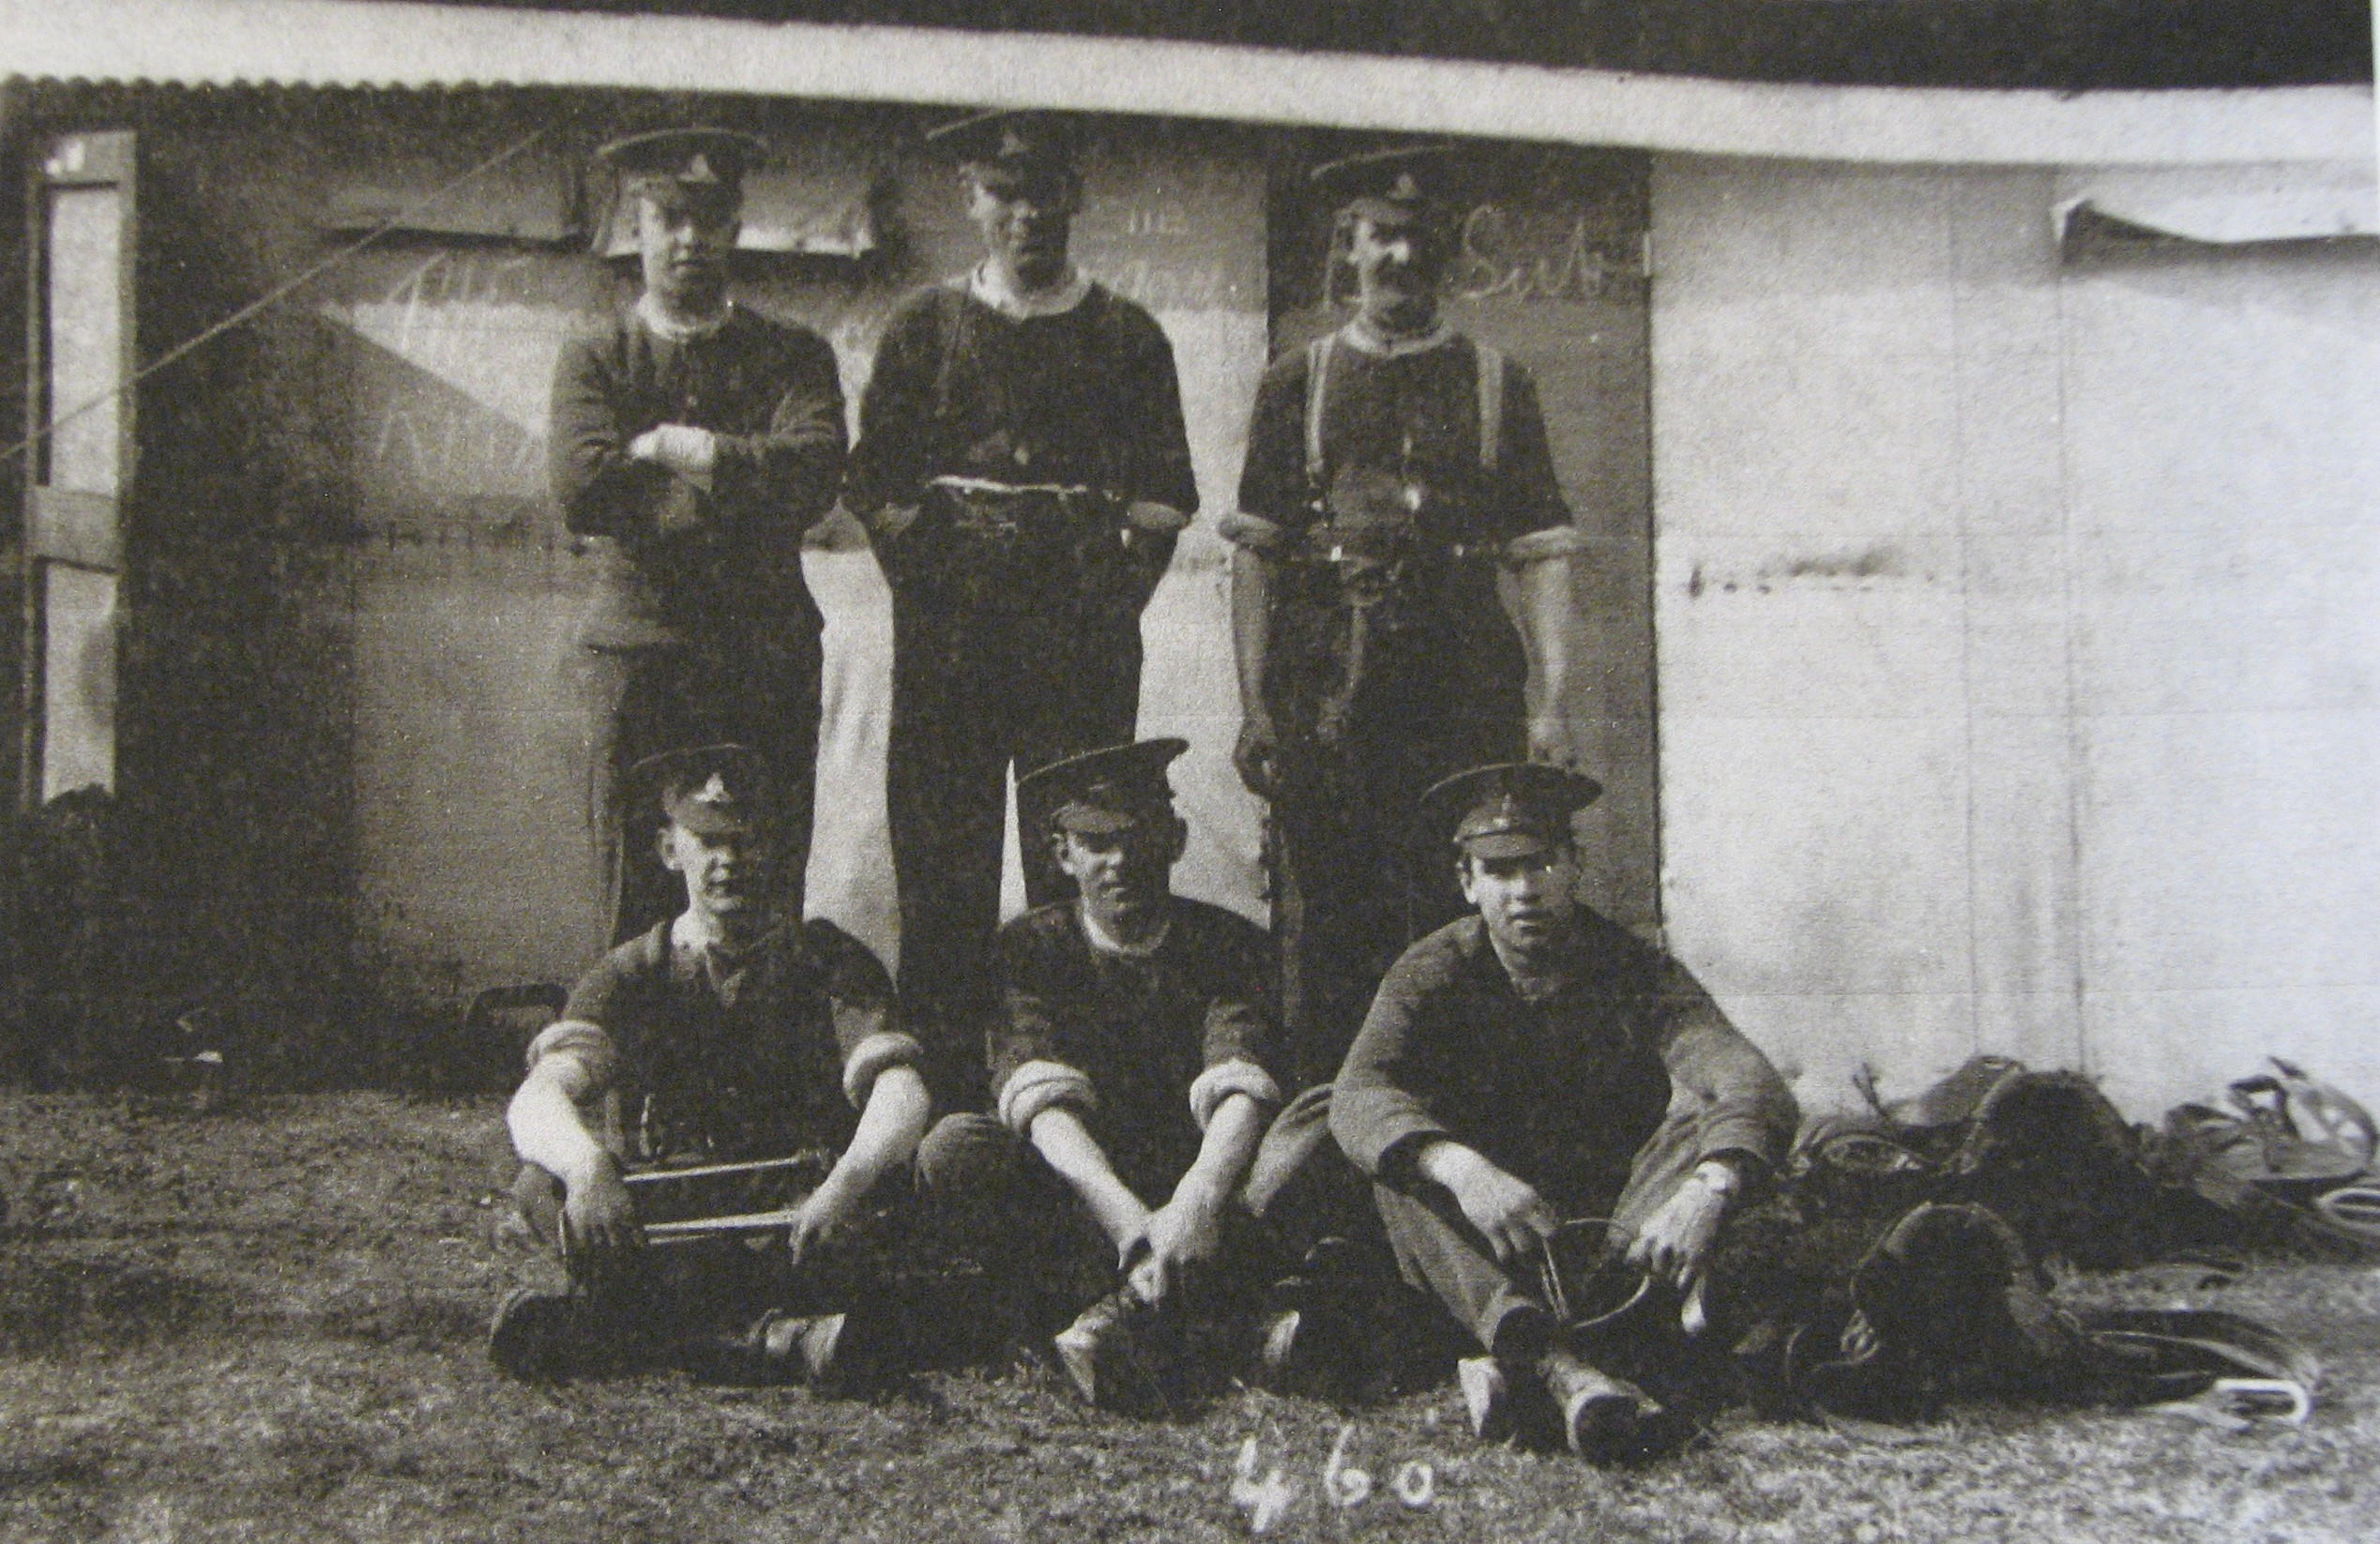 Leonard (top left) and some of his comrades<br>Photograph courtesy of the Manningtree Museum